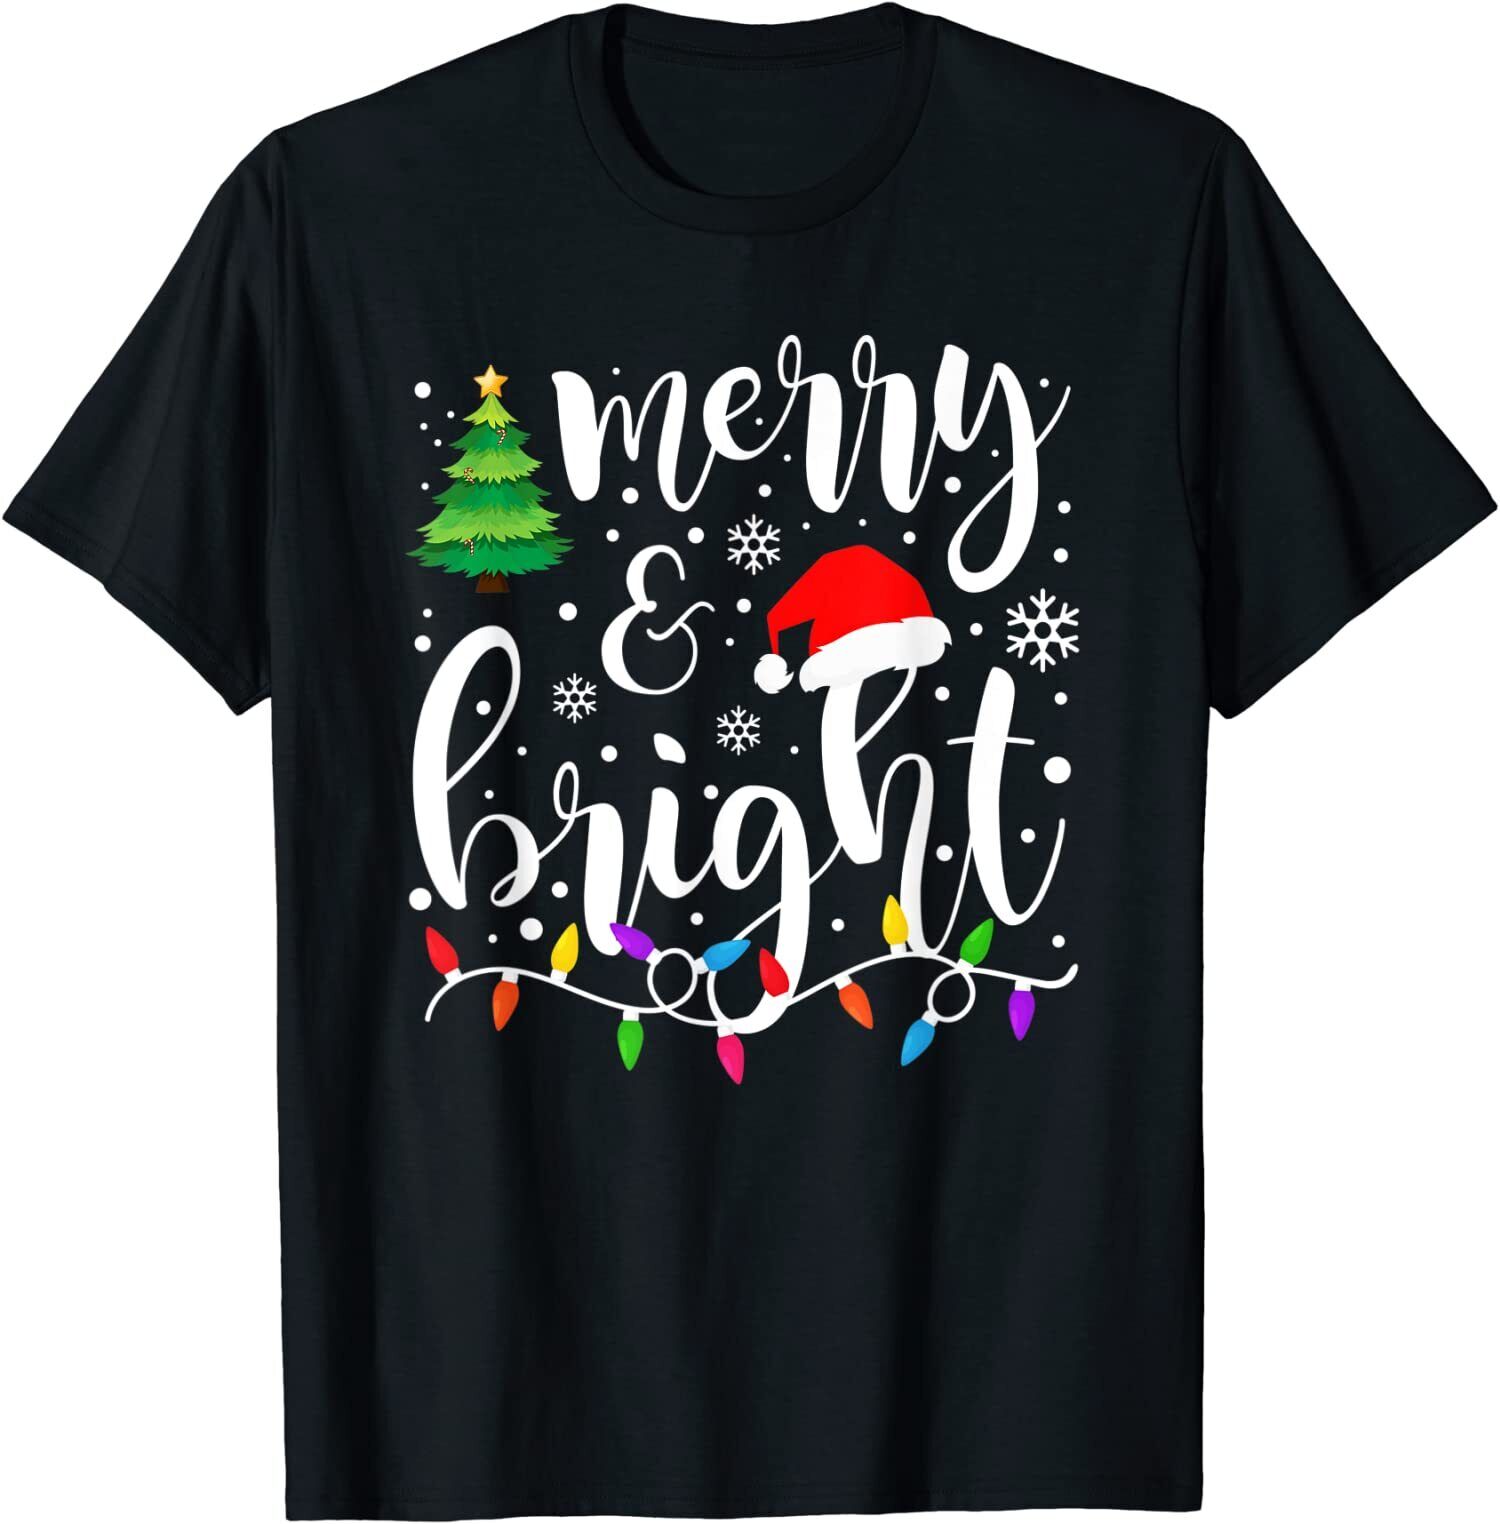 Merry and Bright Christmas Lights Funny Family Christmas Gift Idea T-Shirt S-3XL